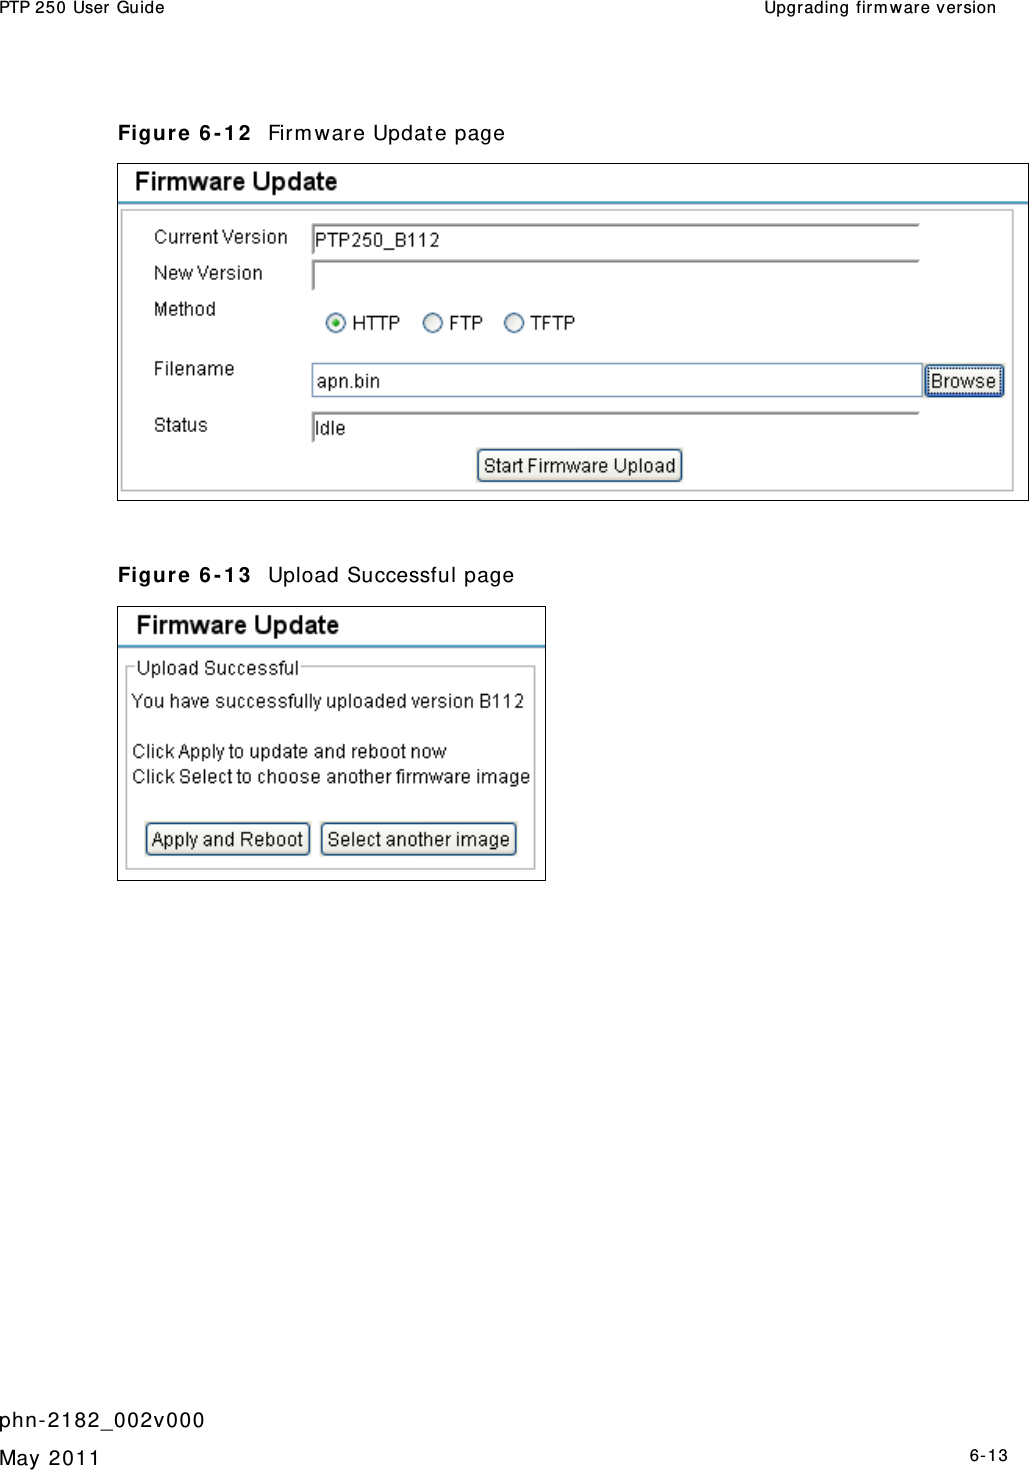 PTP 250 User Guide  Upgr ading fir m ware version   phn- 2182_002v000   May 2011   6-13  Figure 6 - 1 2   Firm ware Updat e page   Figure 6 - 1 3   Upload Successful page       